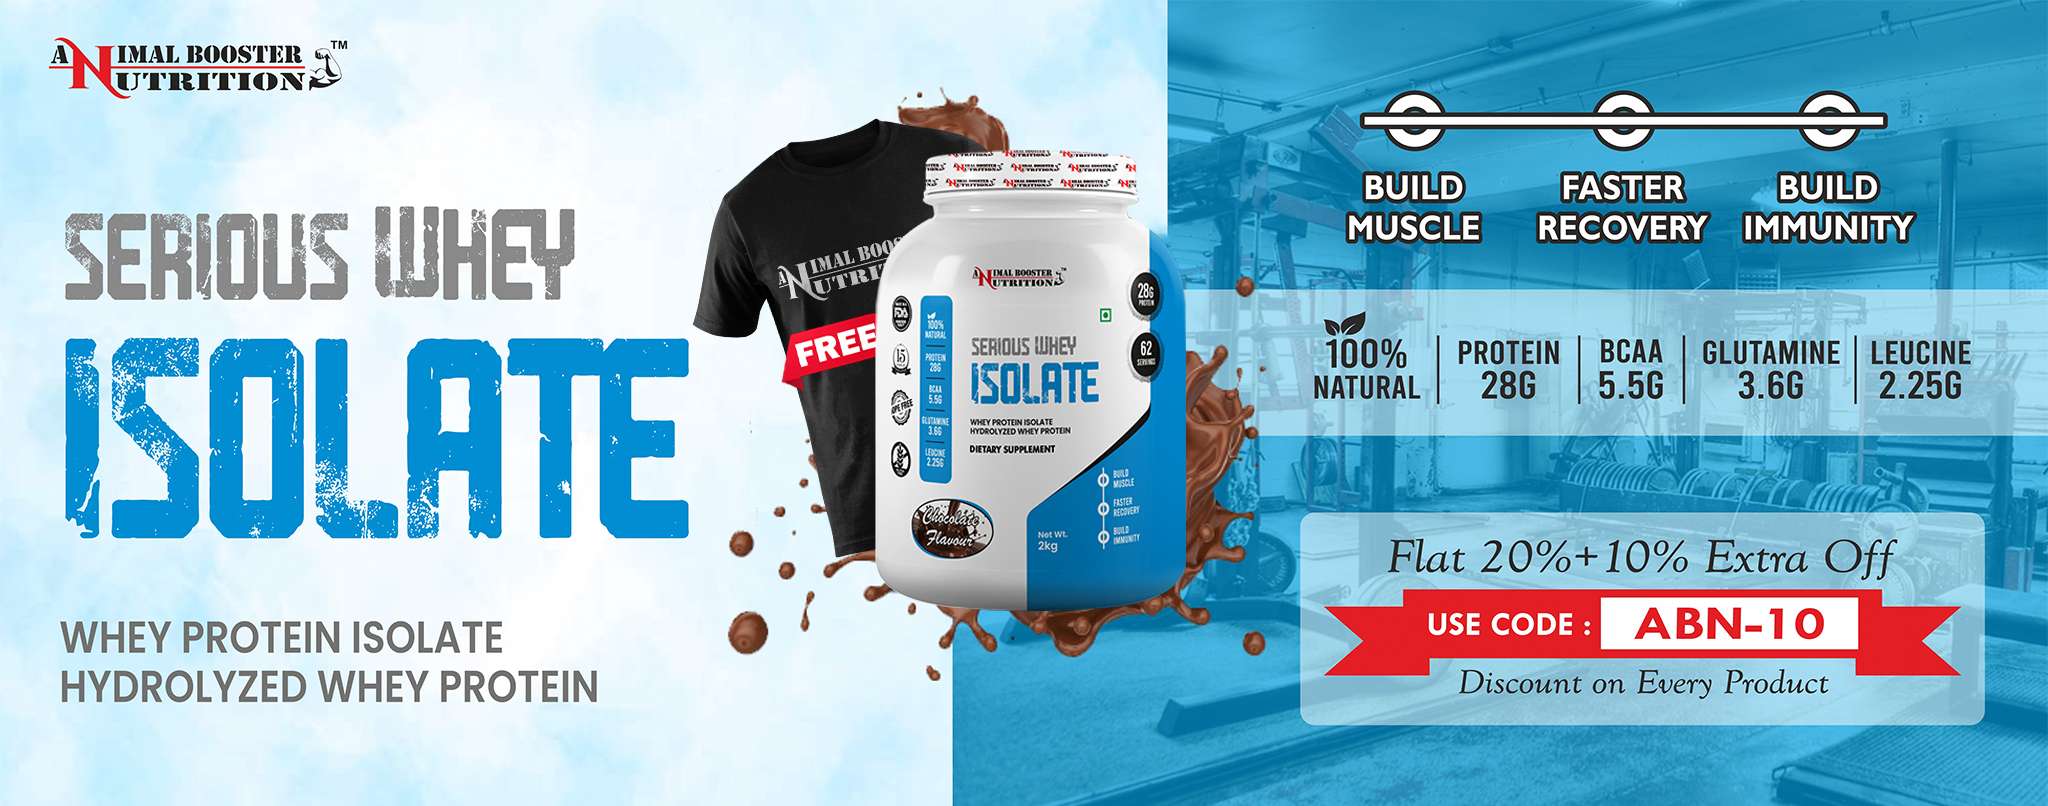 Serious Whey Isolate banner offer